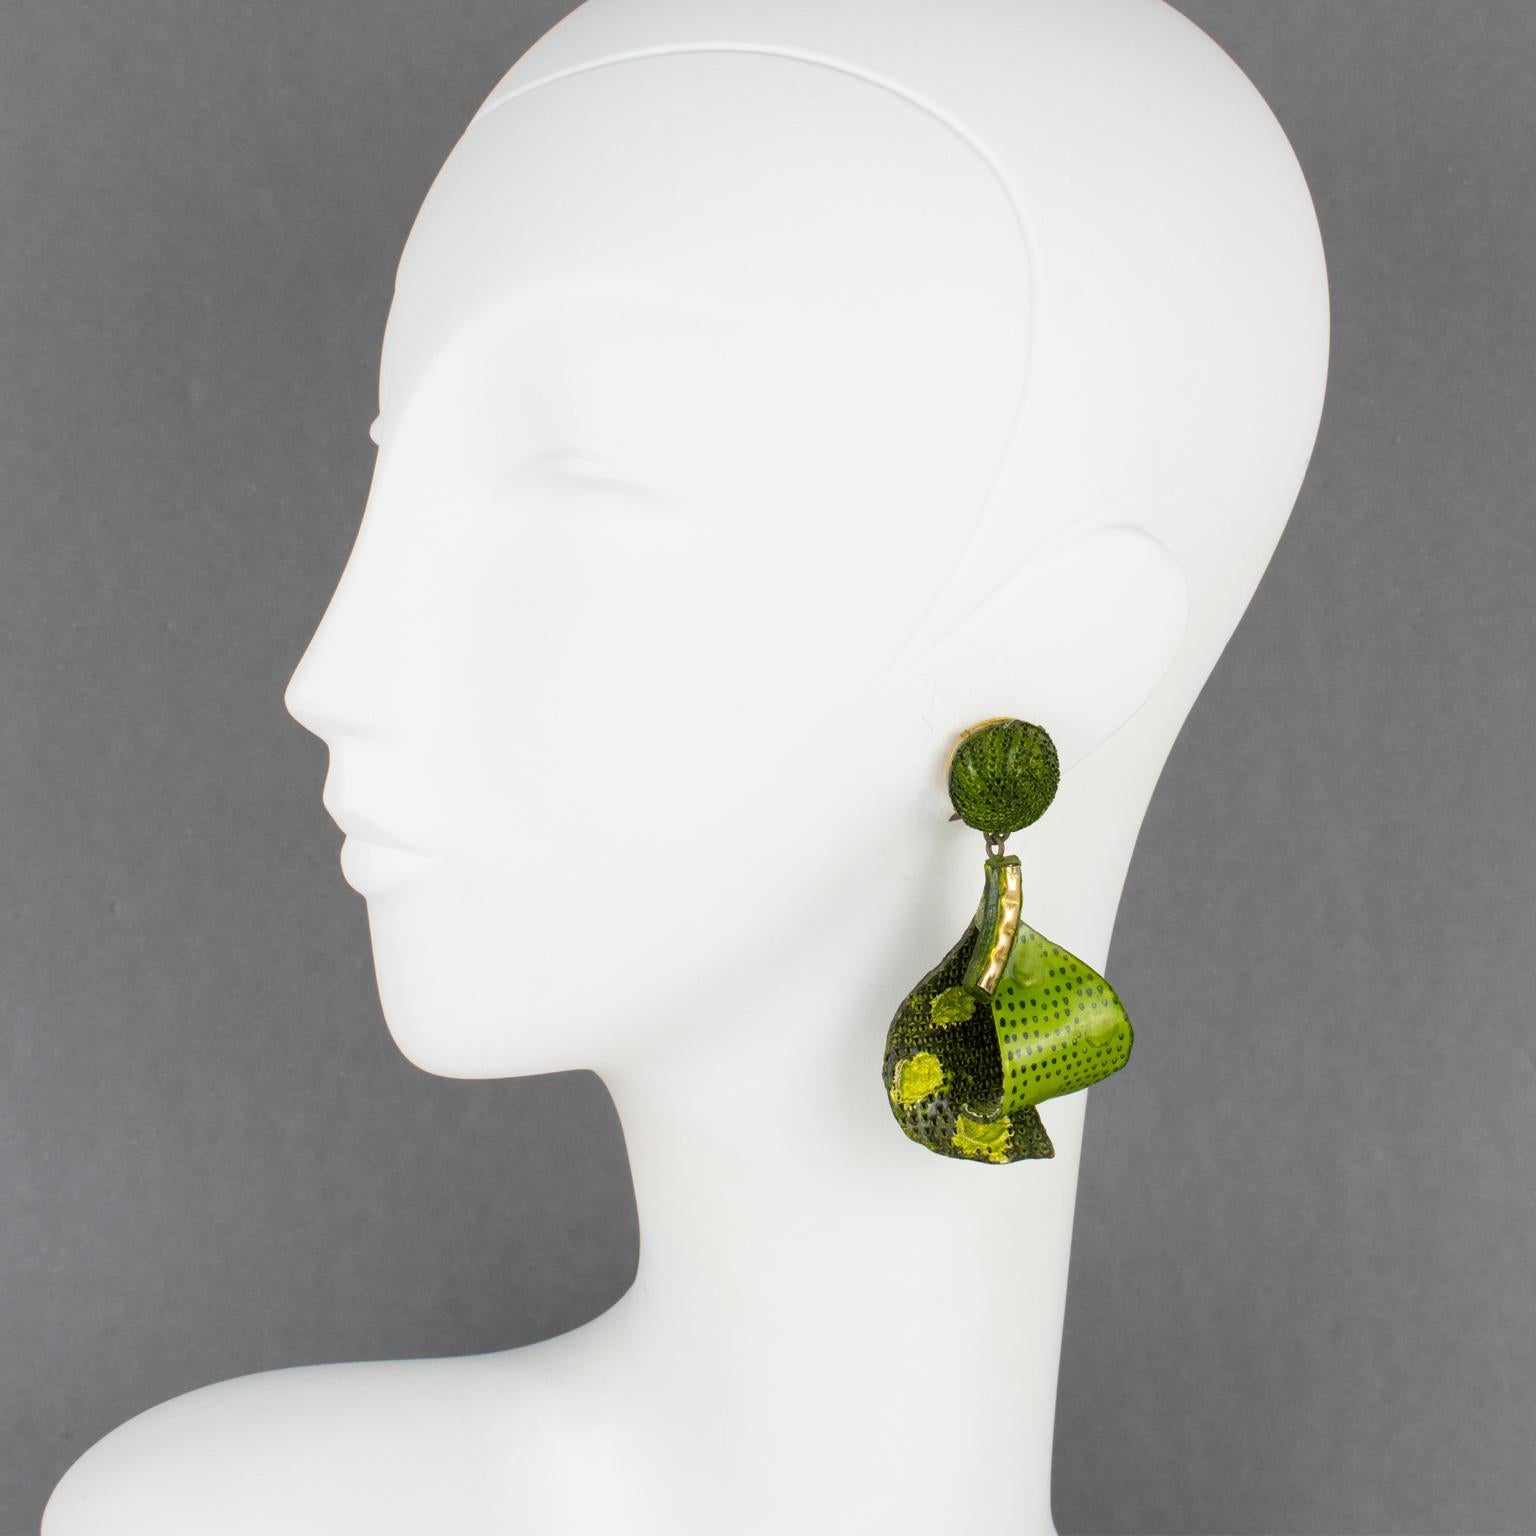 Elegant dimensional dangling clip-on earrings by Cilea Paris. Floral and geometric-inspired hand-made artisanal resin earrings featuring large leaves with textured patterns built together to form a powerful statement piece. A very nice assorted